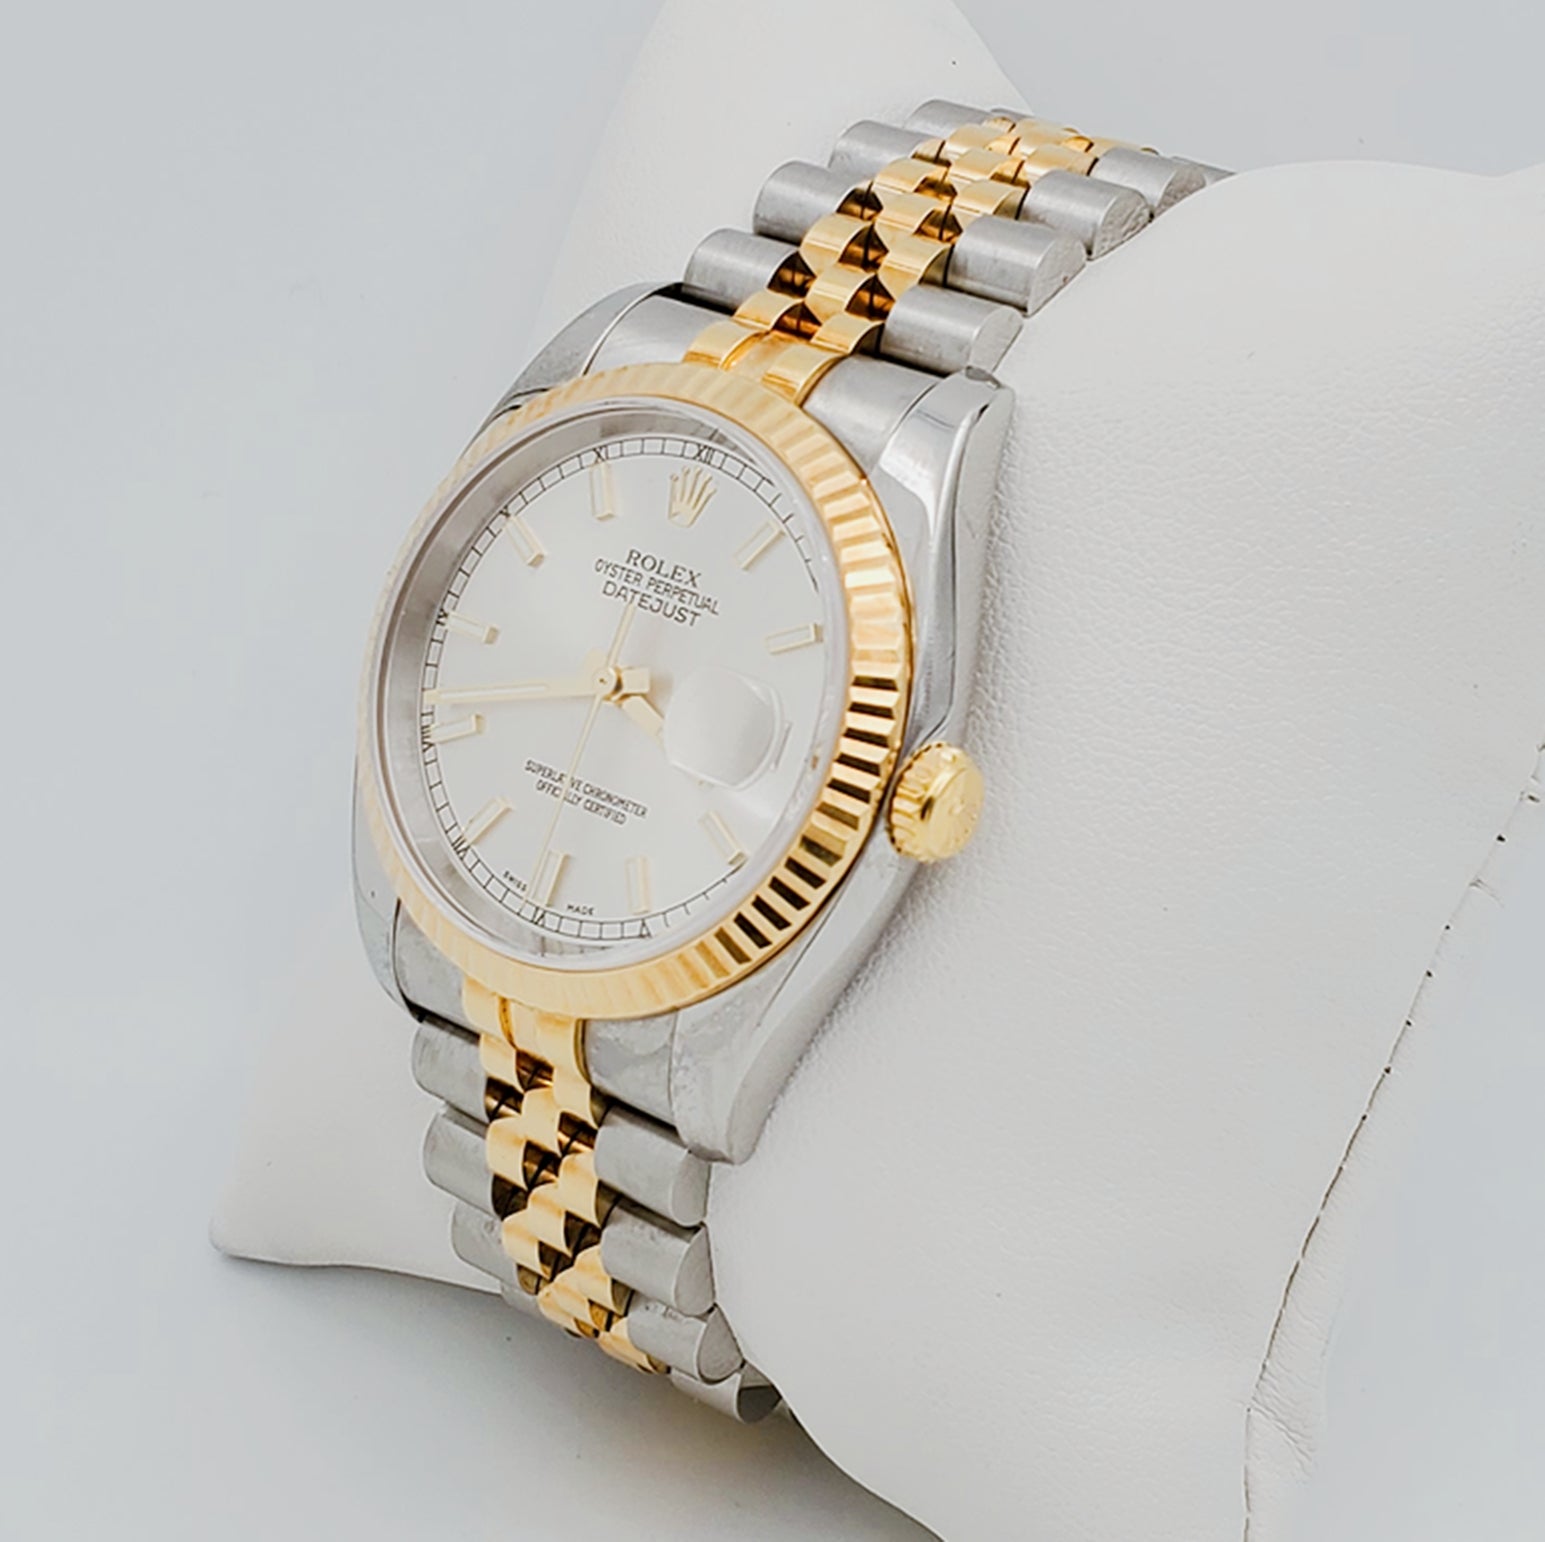 Men's Rolex 36mm DateJust 18K Yellow Gold / Stainless Steel Watch with Silver Dial, Jubilee Bracelet and Fluted Bezel. (Pre-Owned 112633)